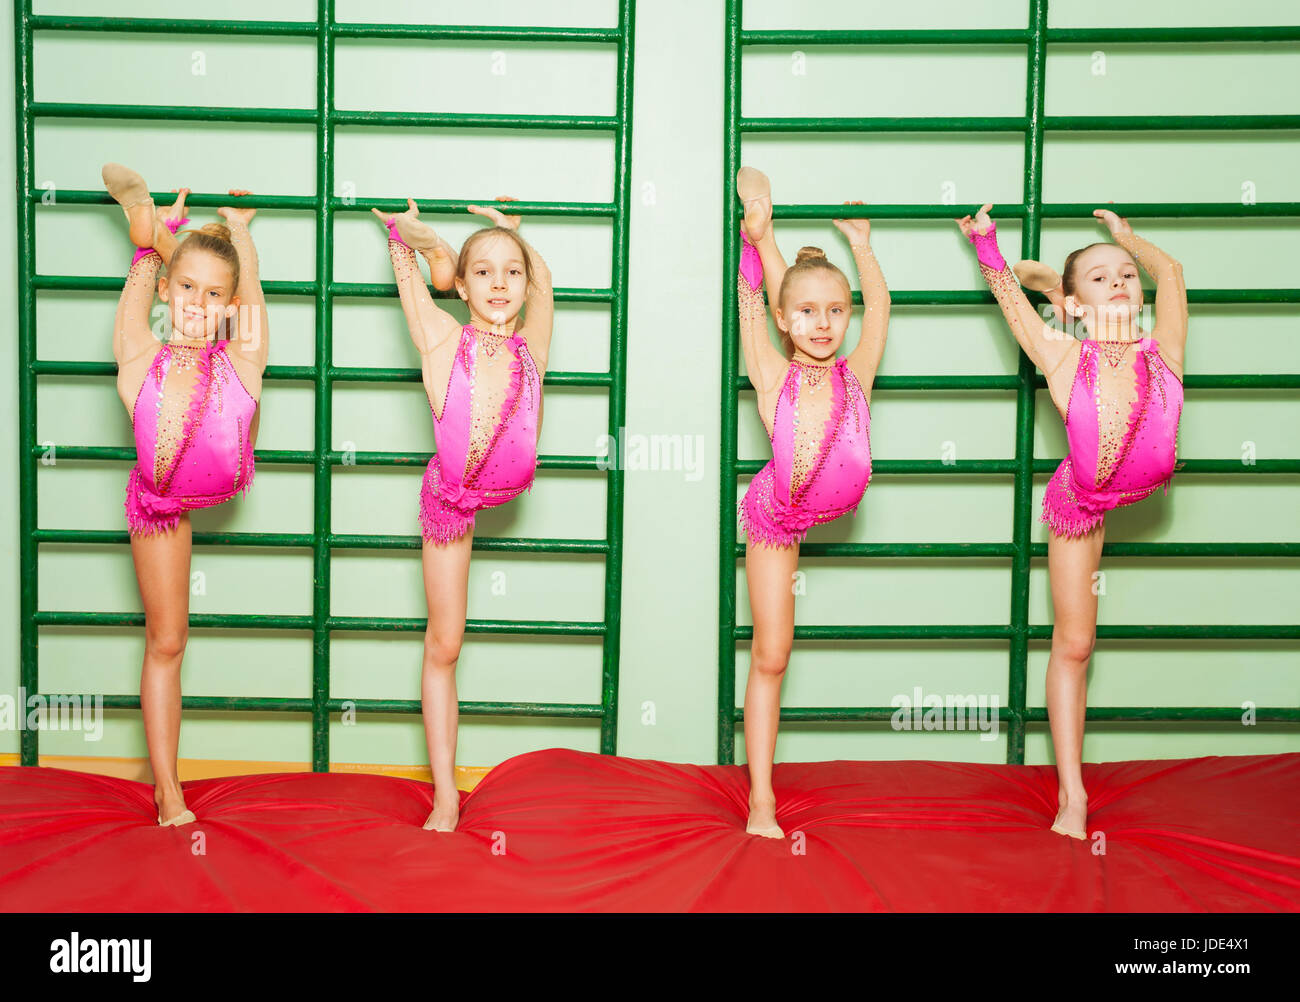 Group of four preteen girls stretching near wall mounted gym ladder during gymnastic class Stock Photo